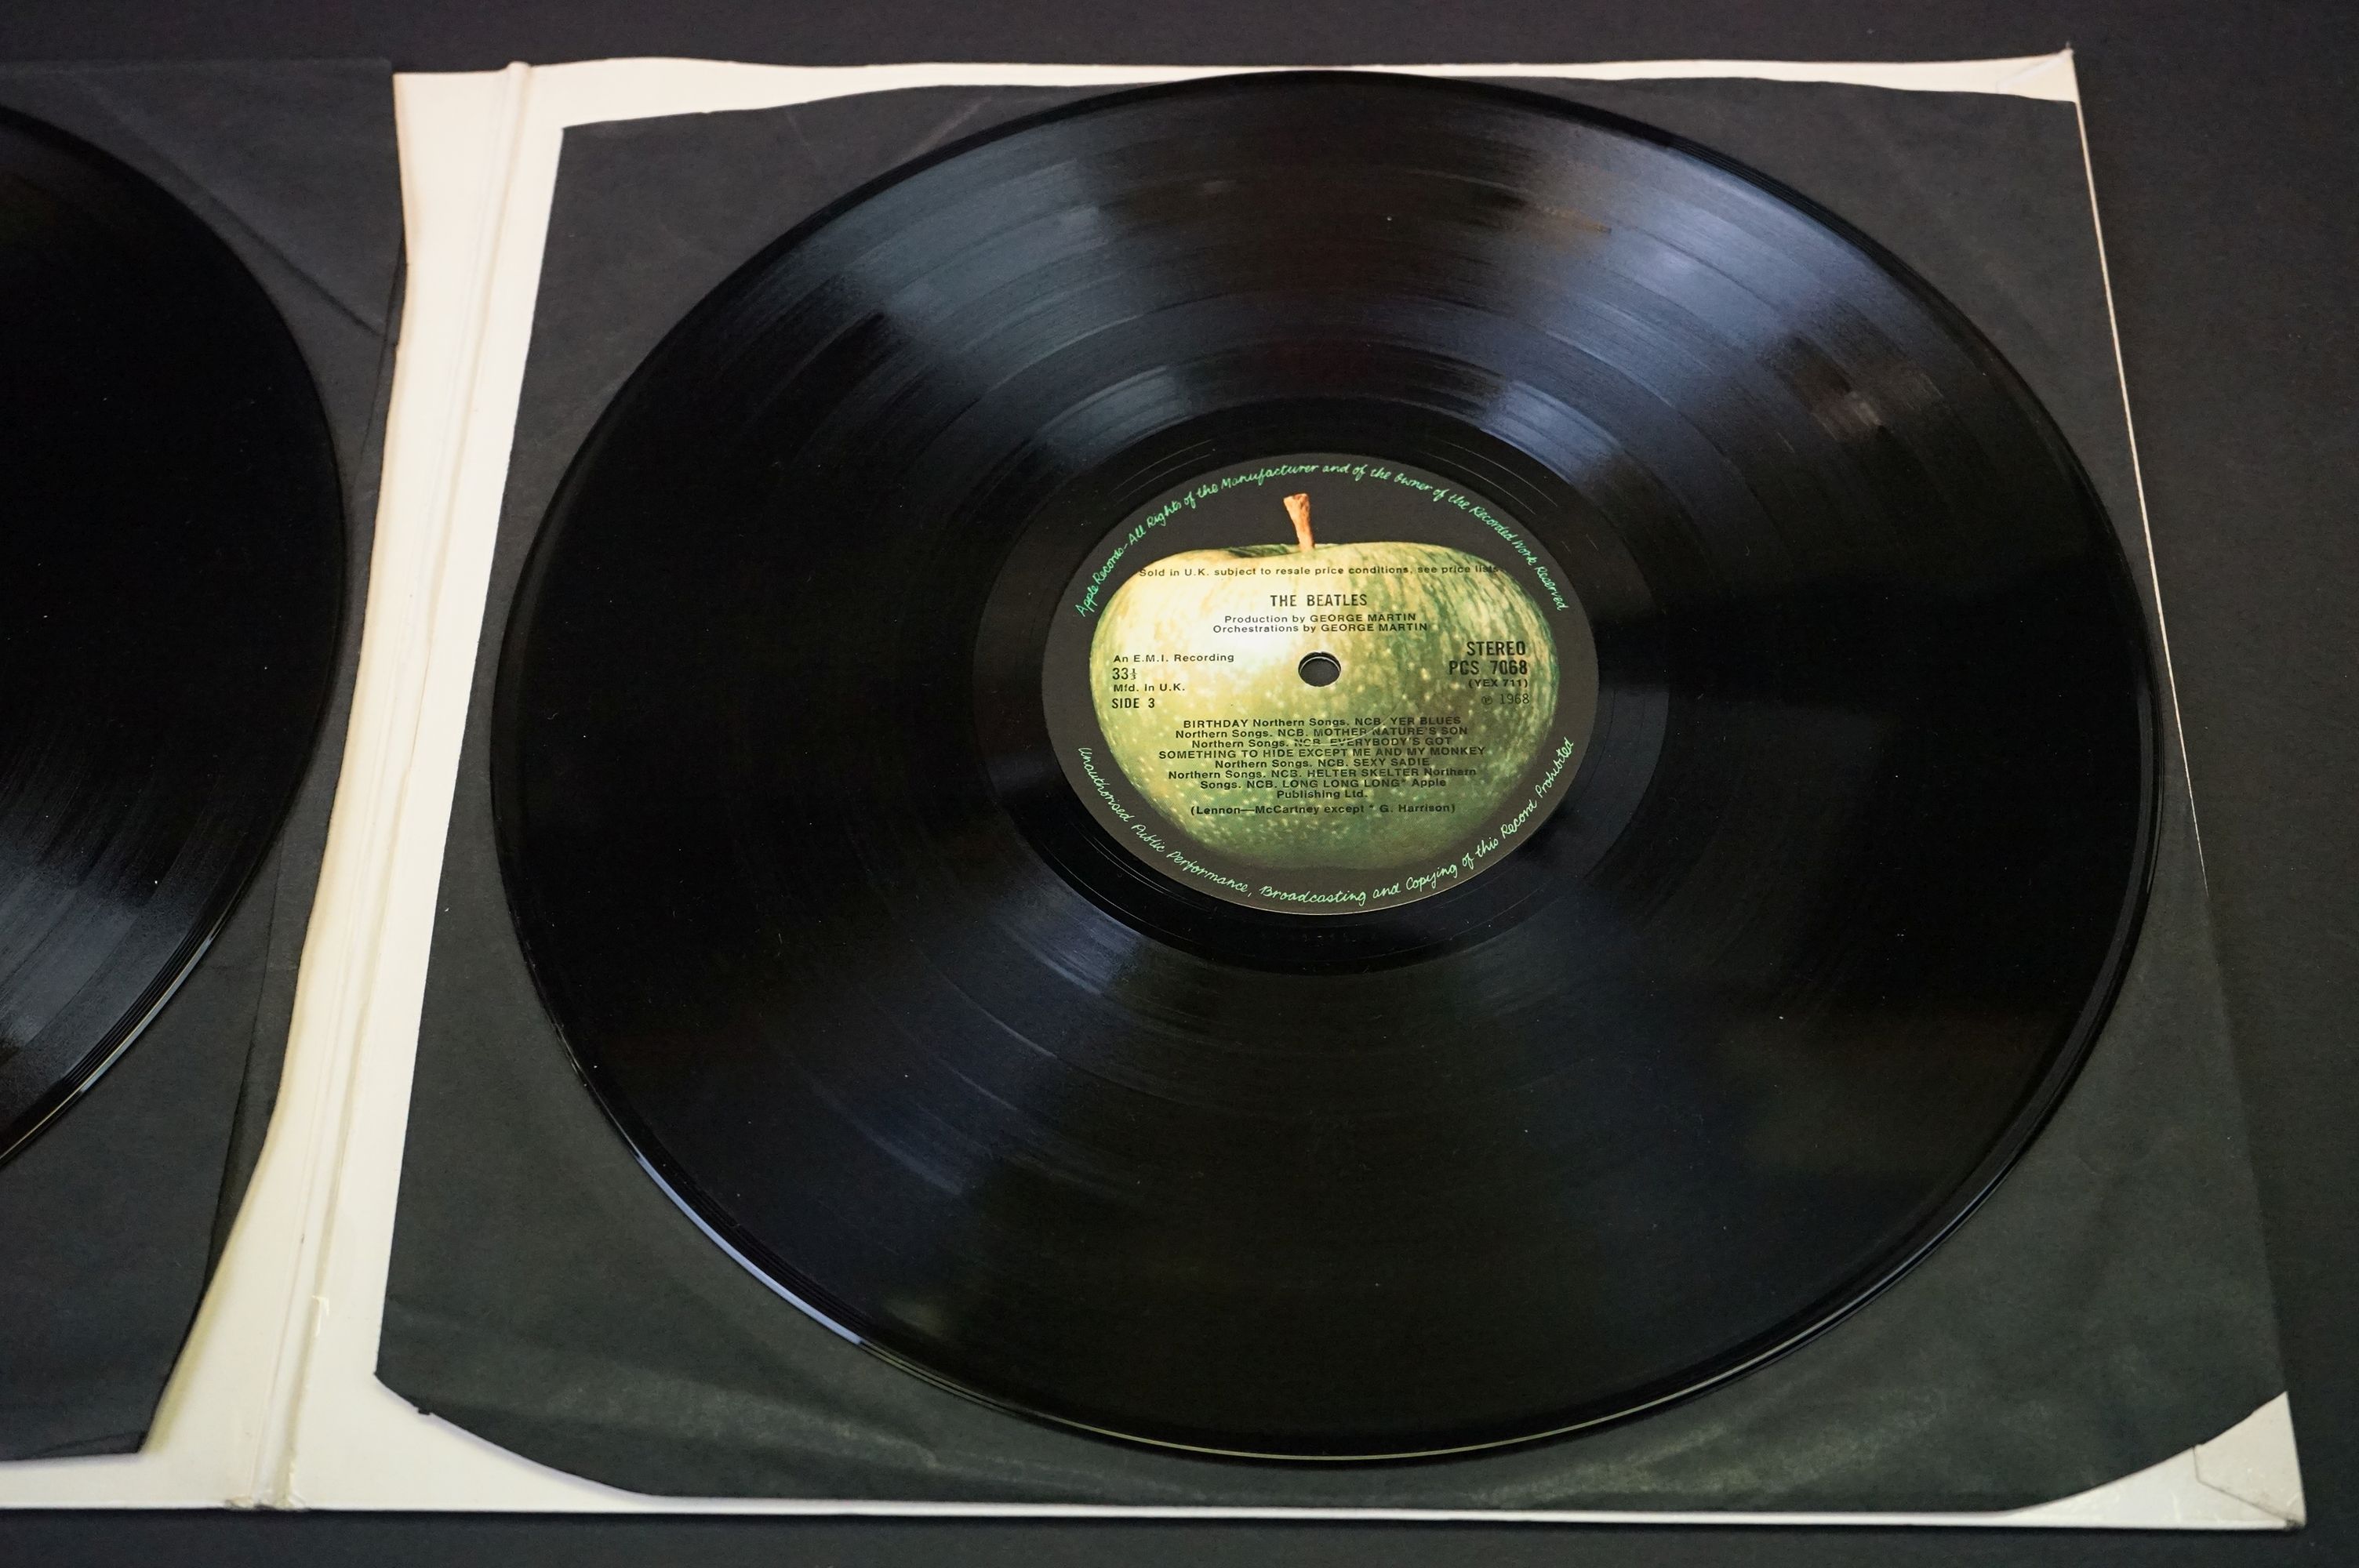 Vinyl - The Beatles White Album PCS 7067/8 low number 0016236. 4 photos and poster present. Sleeve - Image 8 of 9